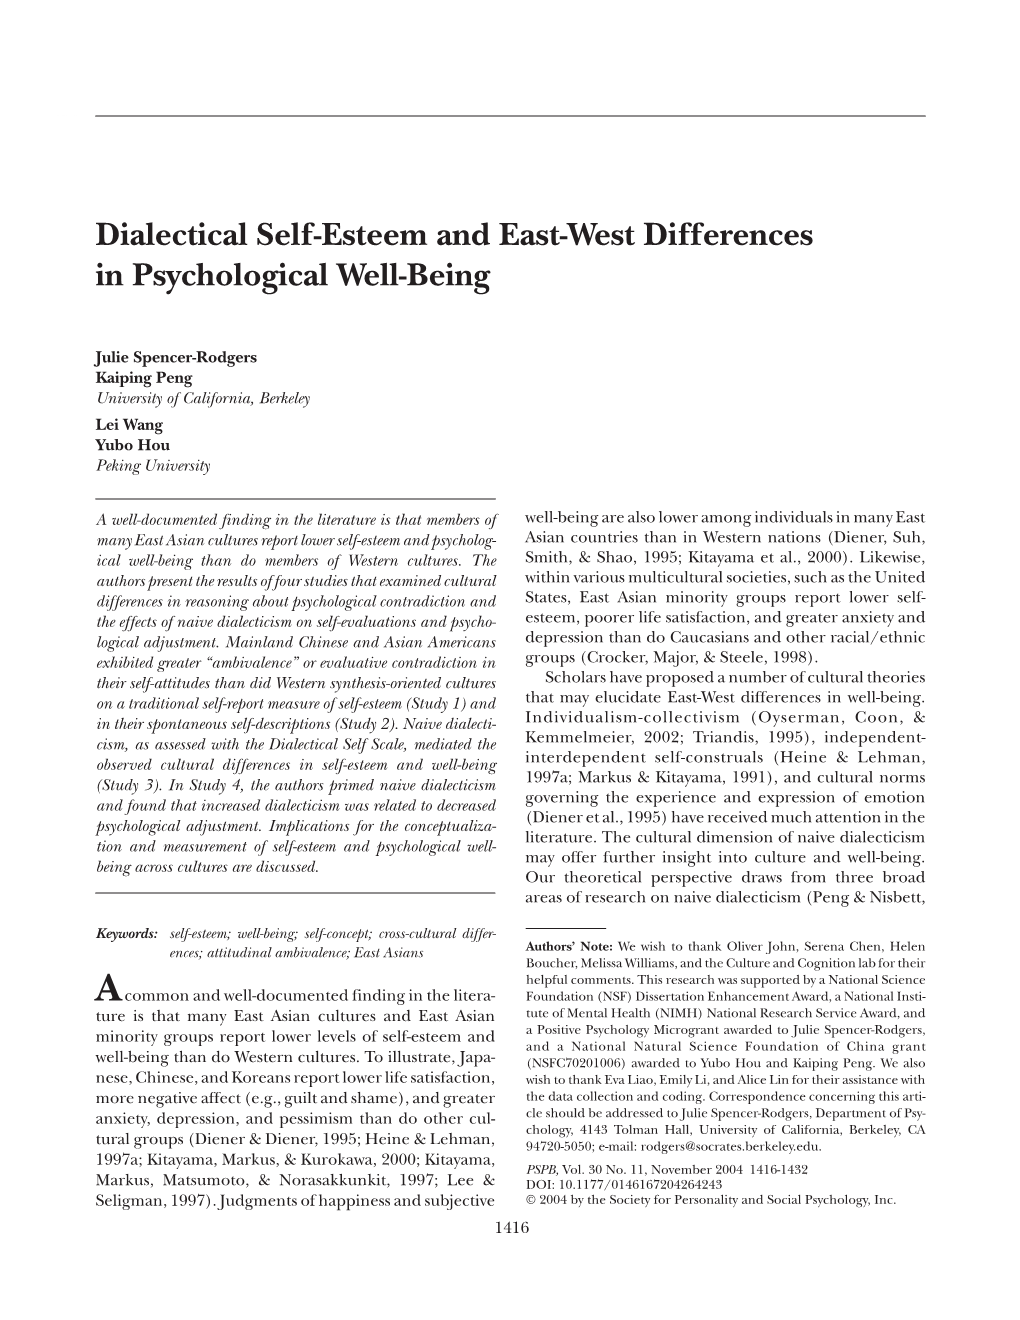 Dialectical Self-Esteem and East-West Differences in Psychological Well-Being